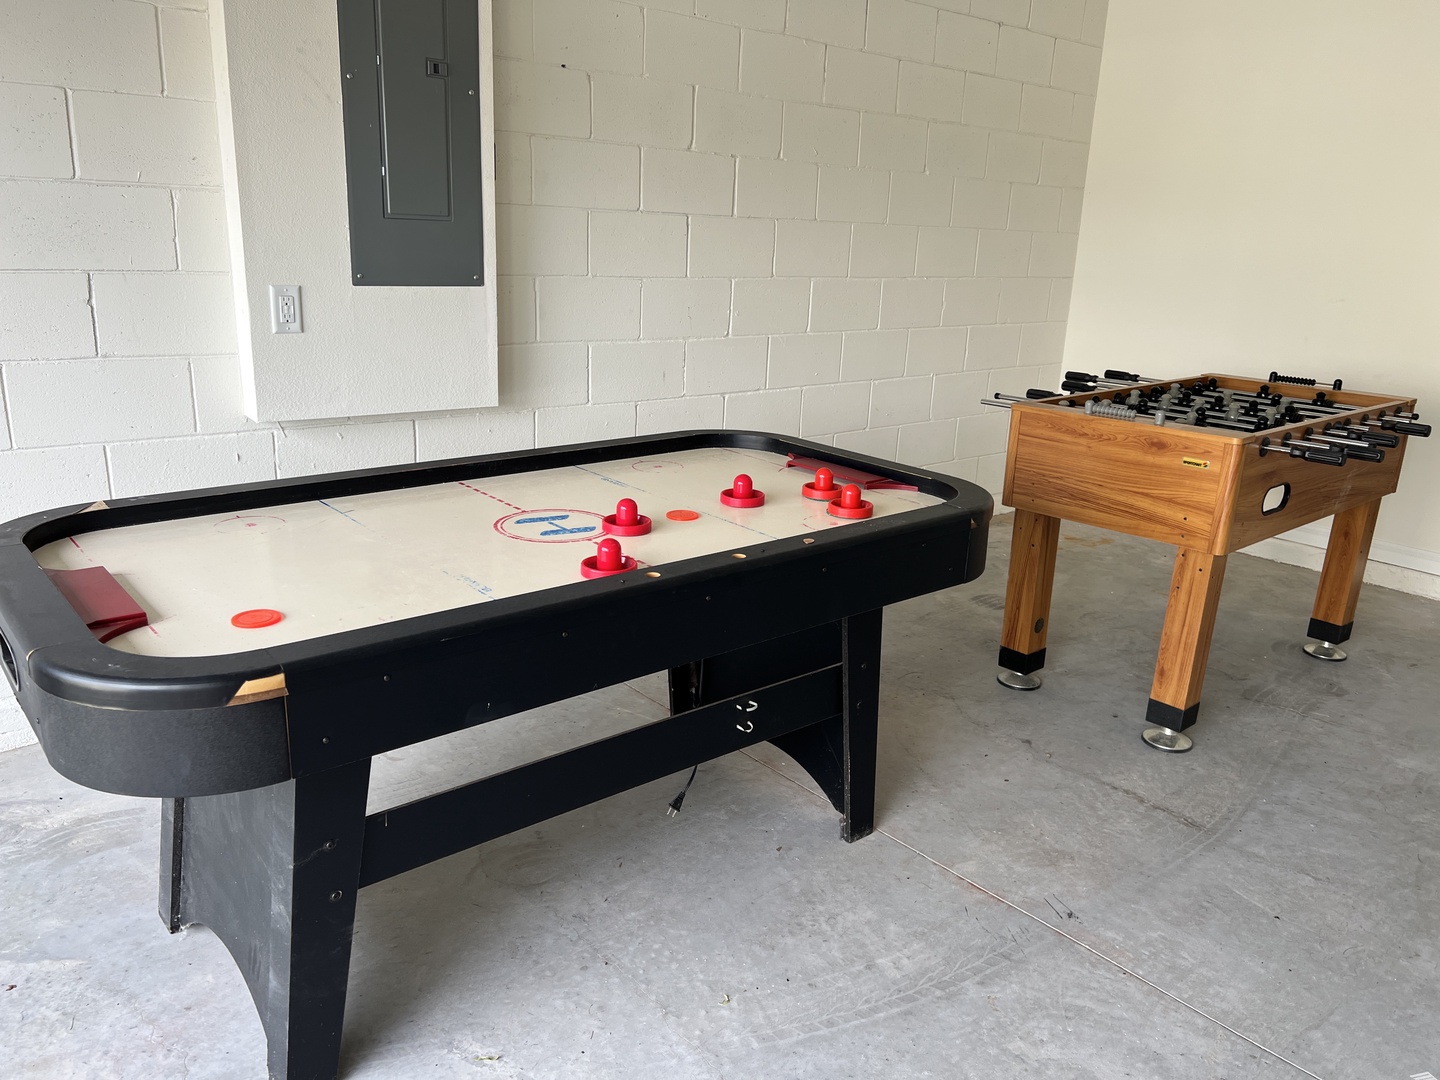 Airhockey and Foosball in the garage